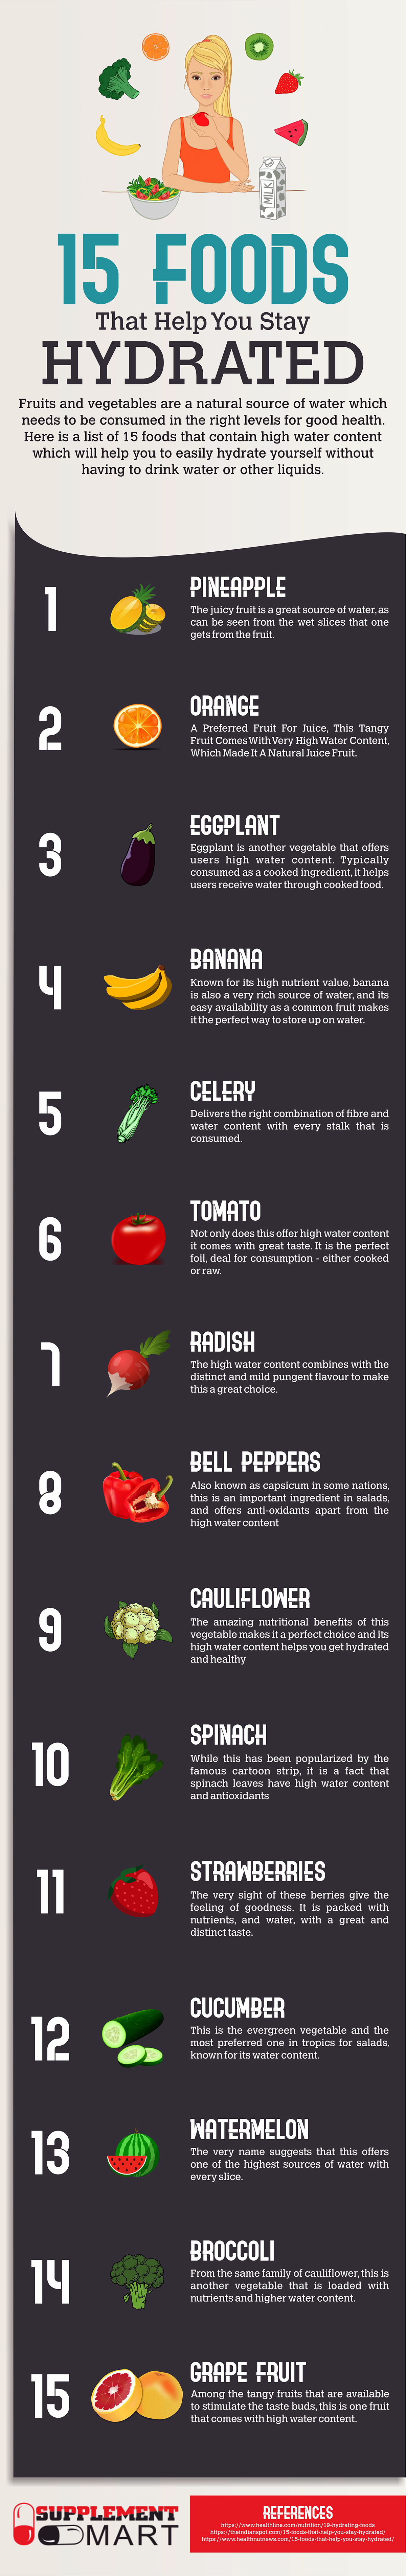 15 Foods that help your stay hydrated #infographic #health